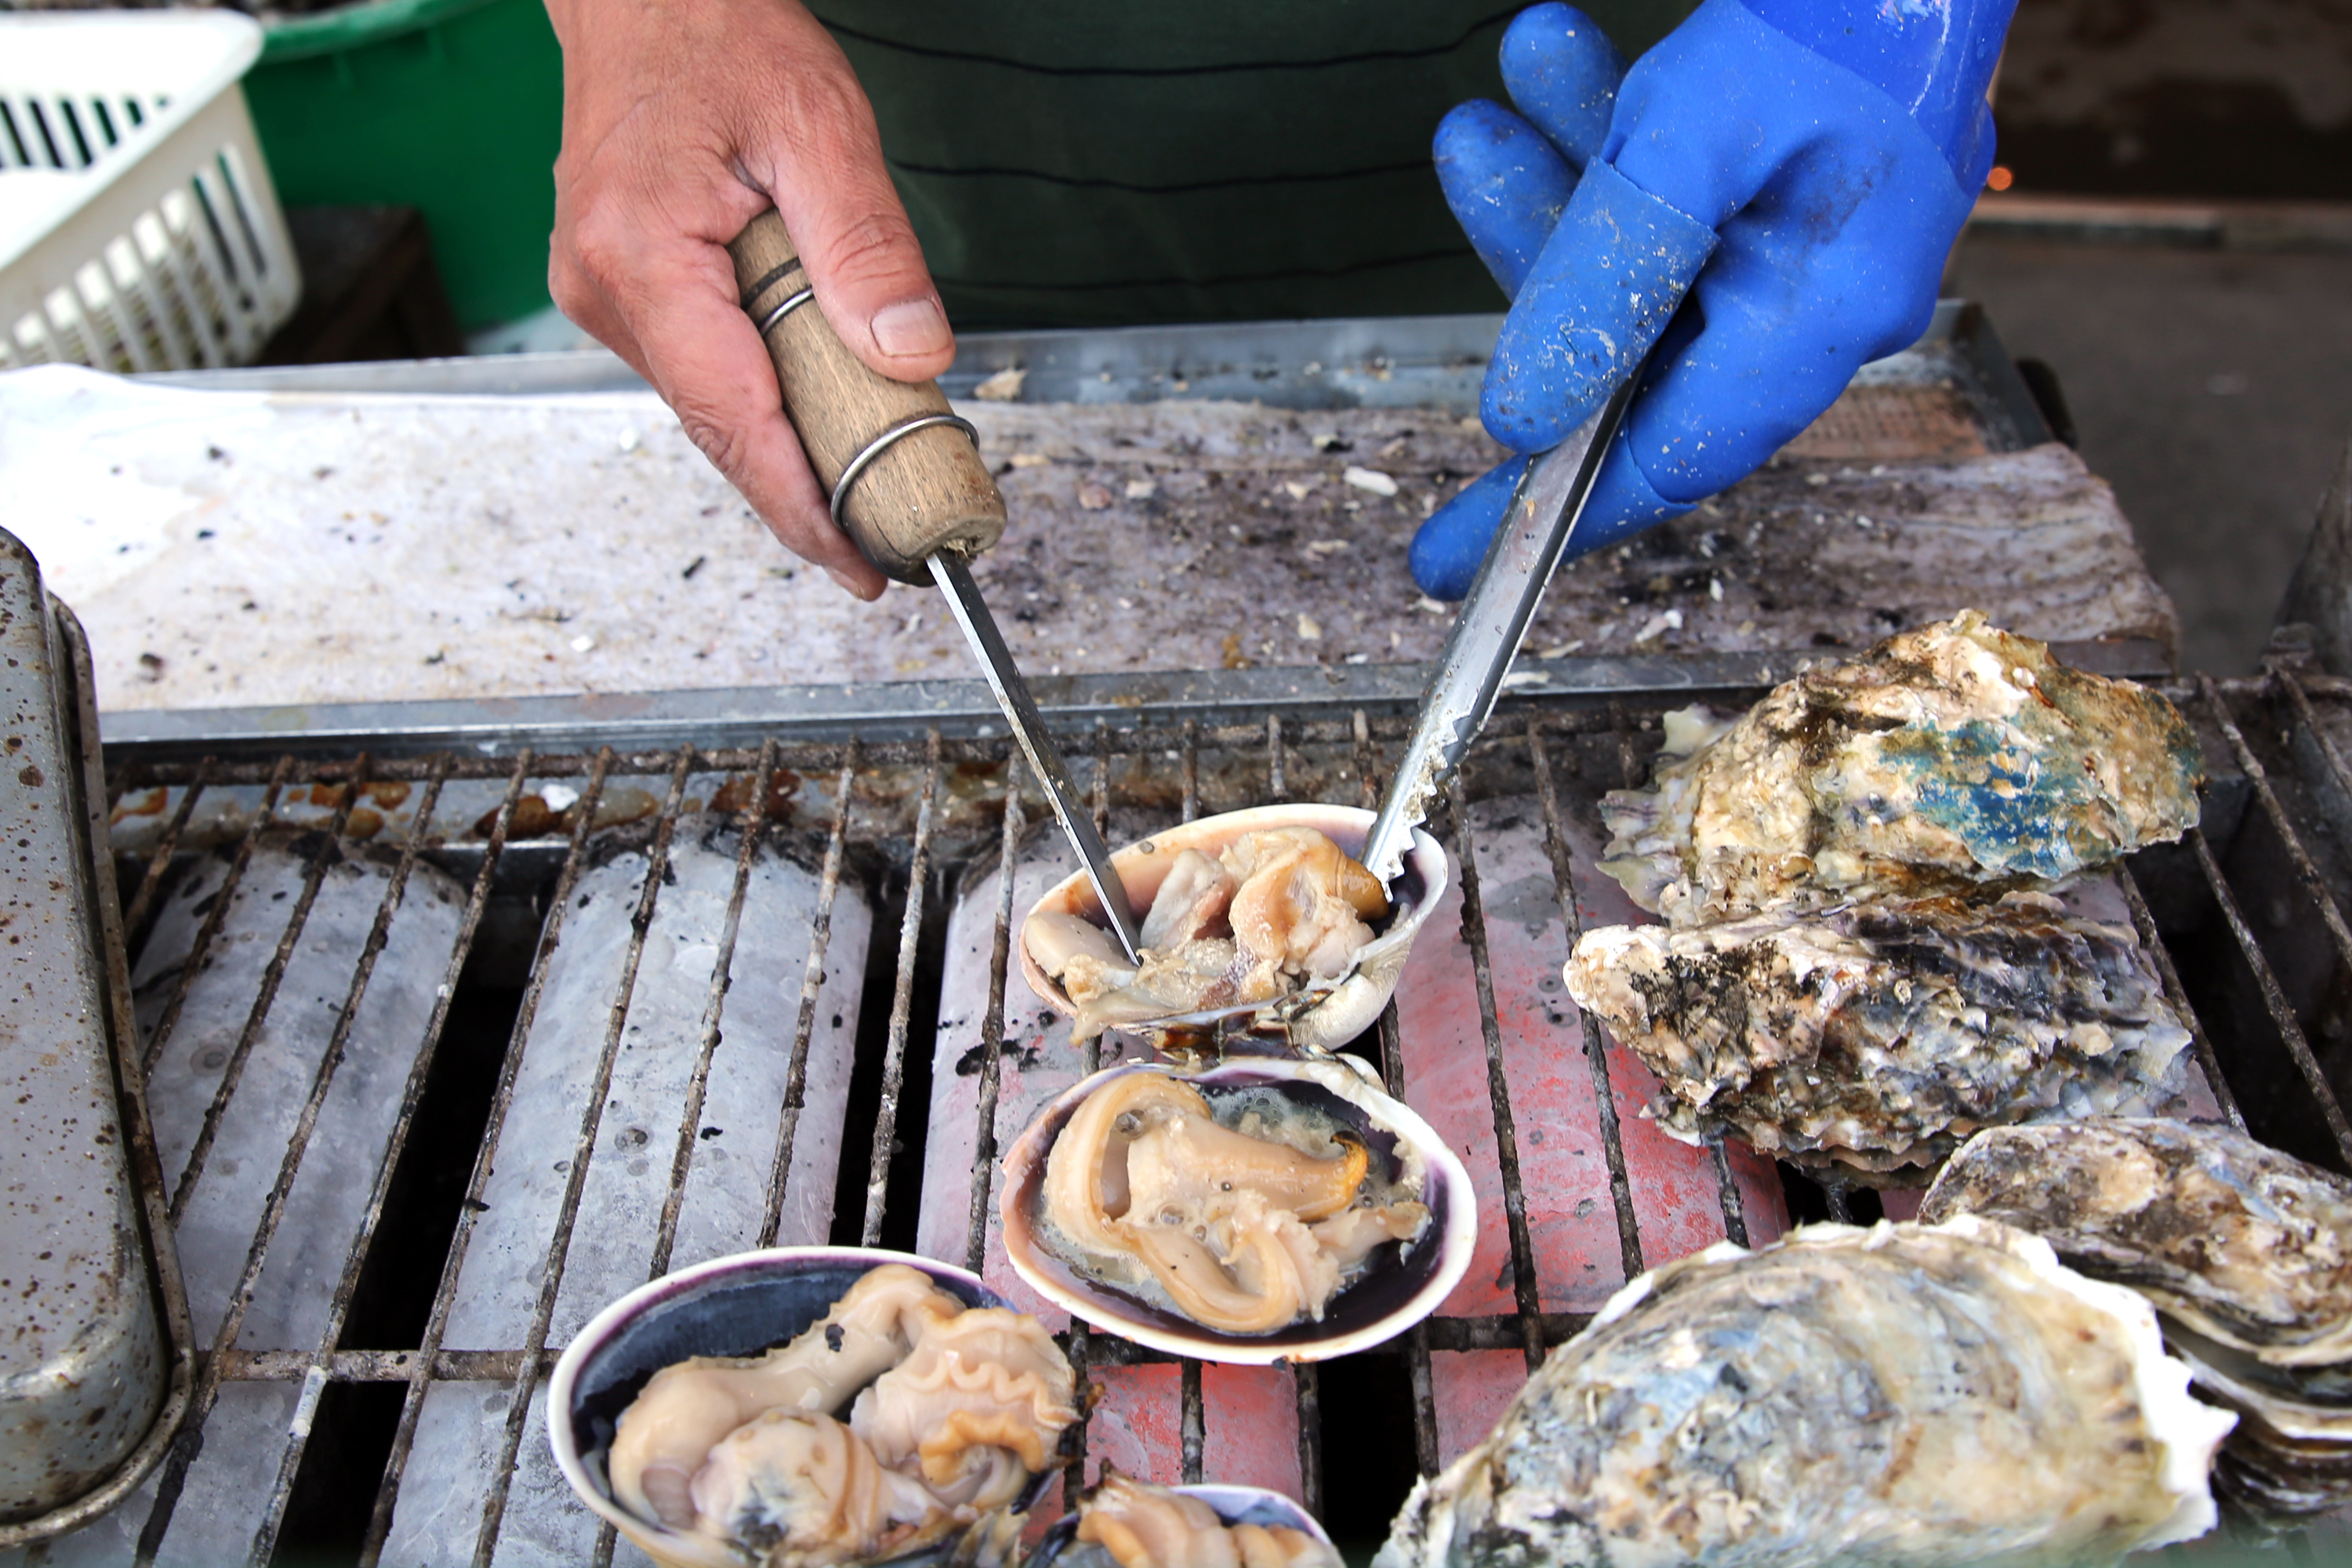 ISE, JAPAN - MAY 05: An employee prepares clams for barbecue on a road side stall at Okage Yokocho, a traditional shopping street on May 5, 2016 in Ise, Japan. Ise-Shima prepares for the G7 summit which is to be held on May 26 and 27, 2016. (Photo by Buddhika Weerasinghe/Getty Images) (Buddhika Weerasinghe—Getty Images)